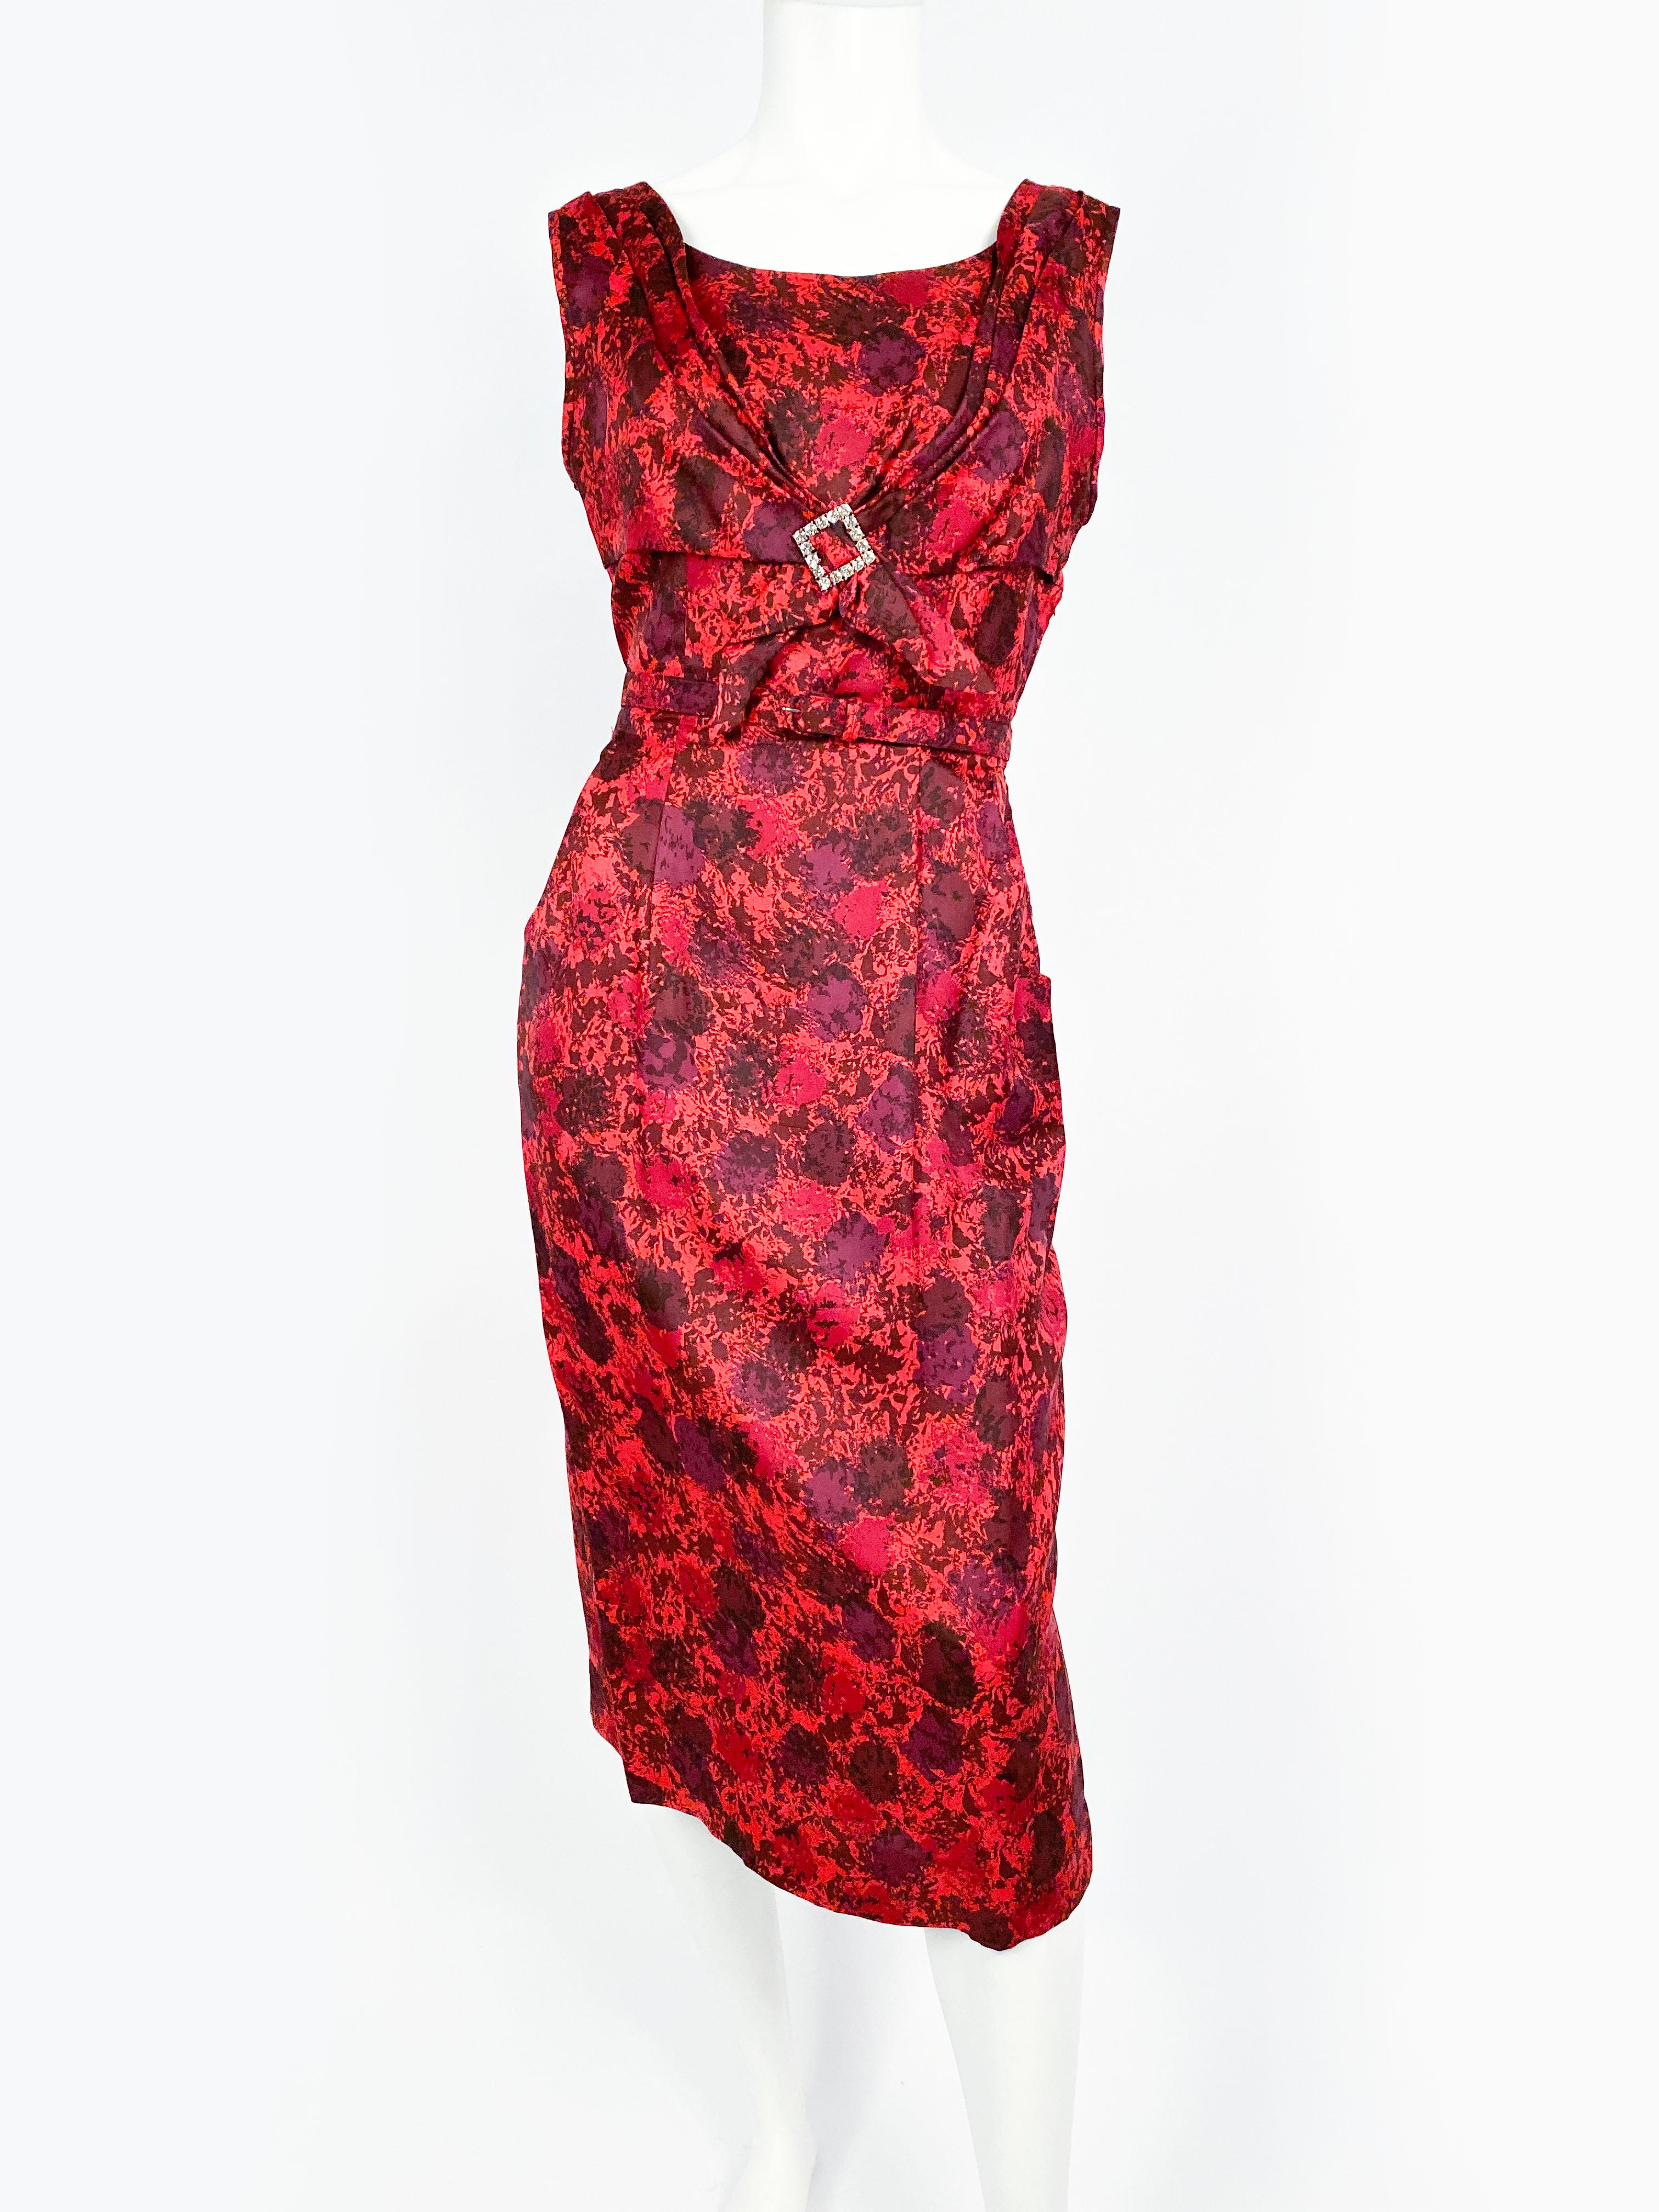 1950s red silk dress featuring a floral-like impressionist print with several tones of red. The bodice has a scoop neckline, an attached gathered panel that is finished with a rhinestone buckle. The skirt of the dress also has two front pocket.